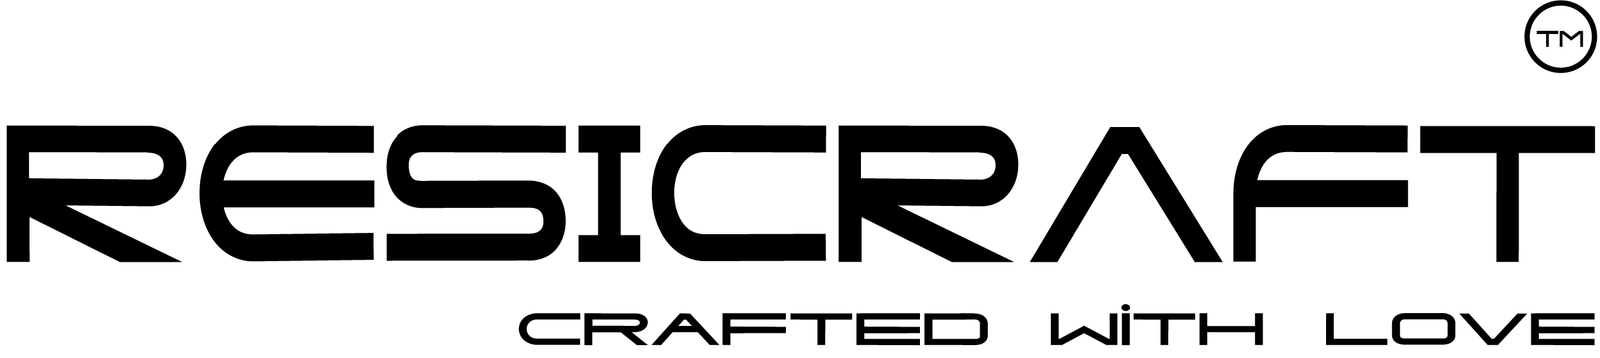 Welcome to Resicraft